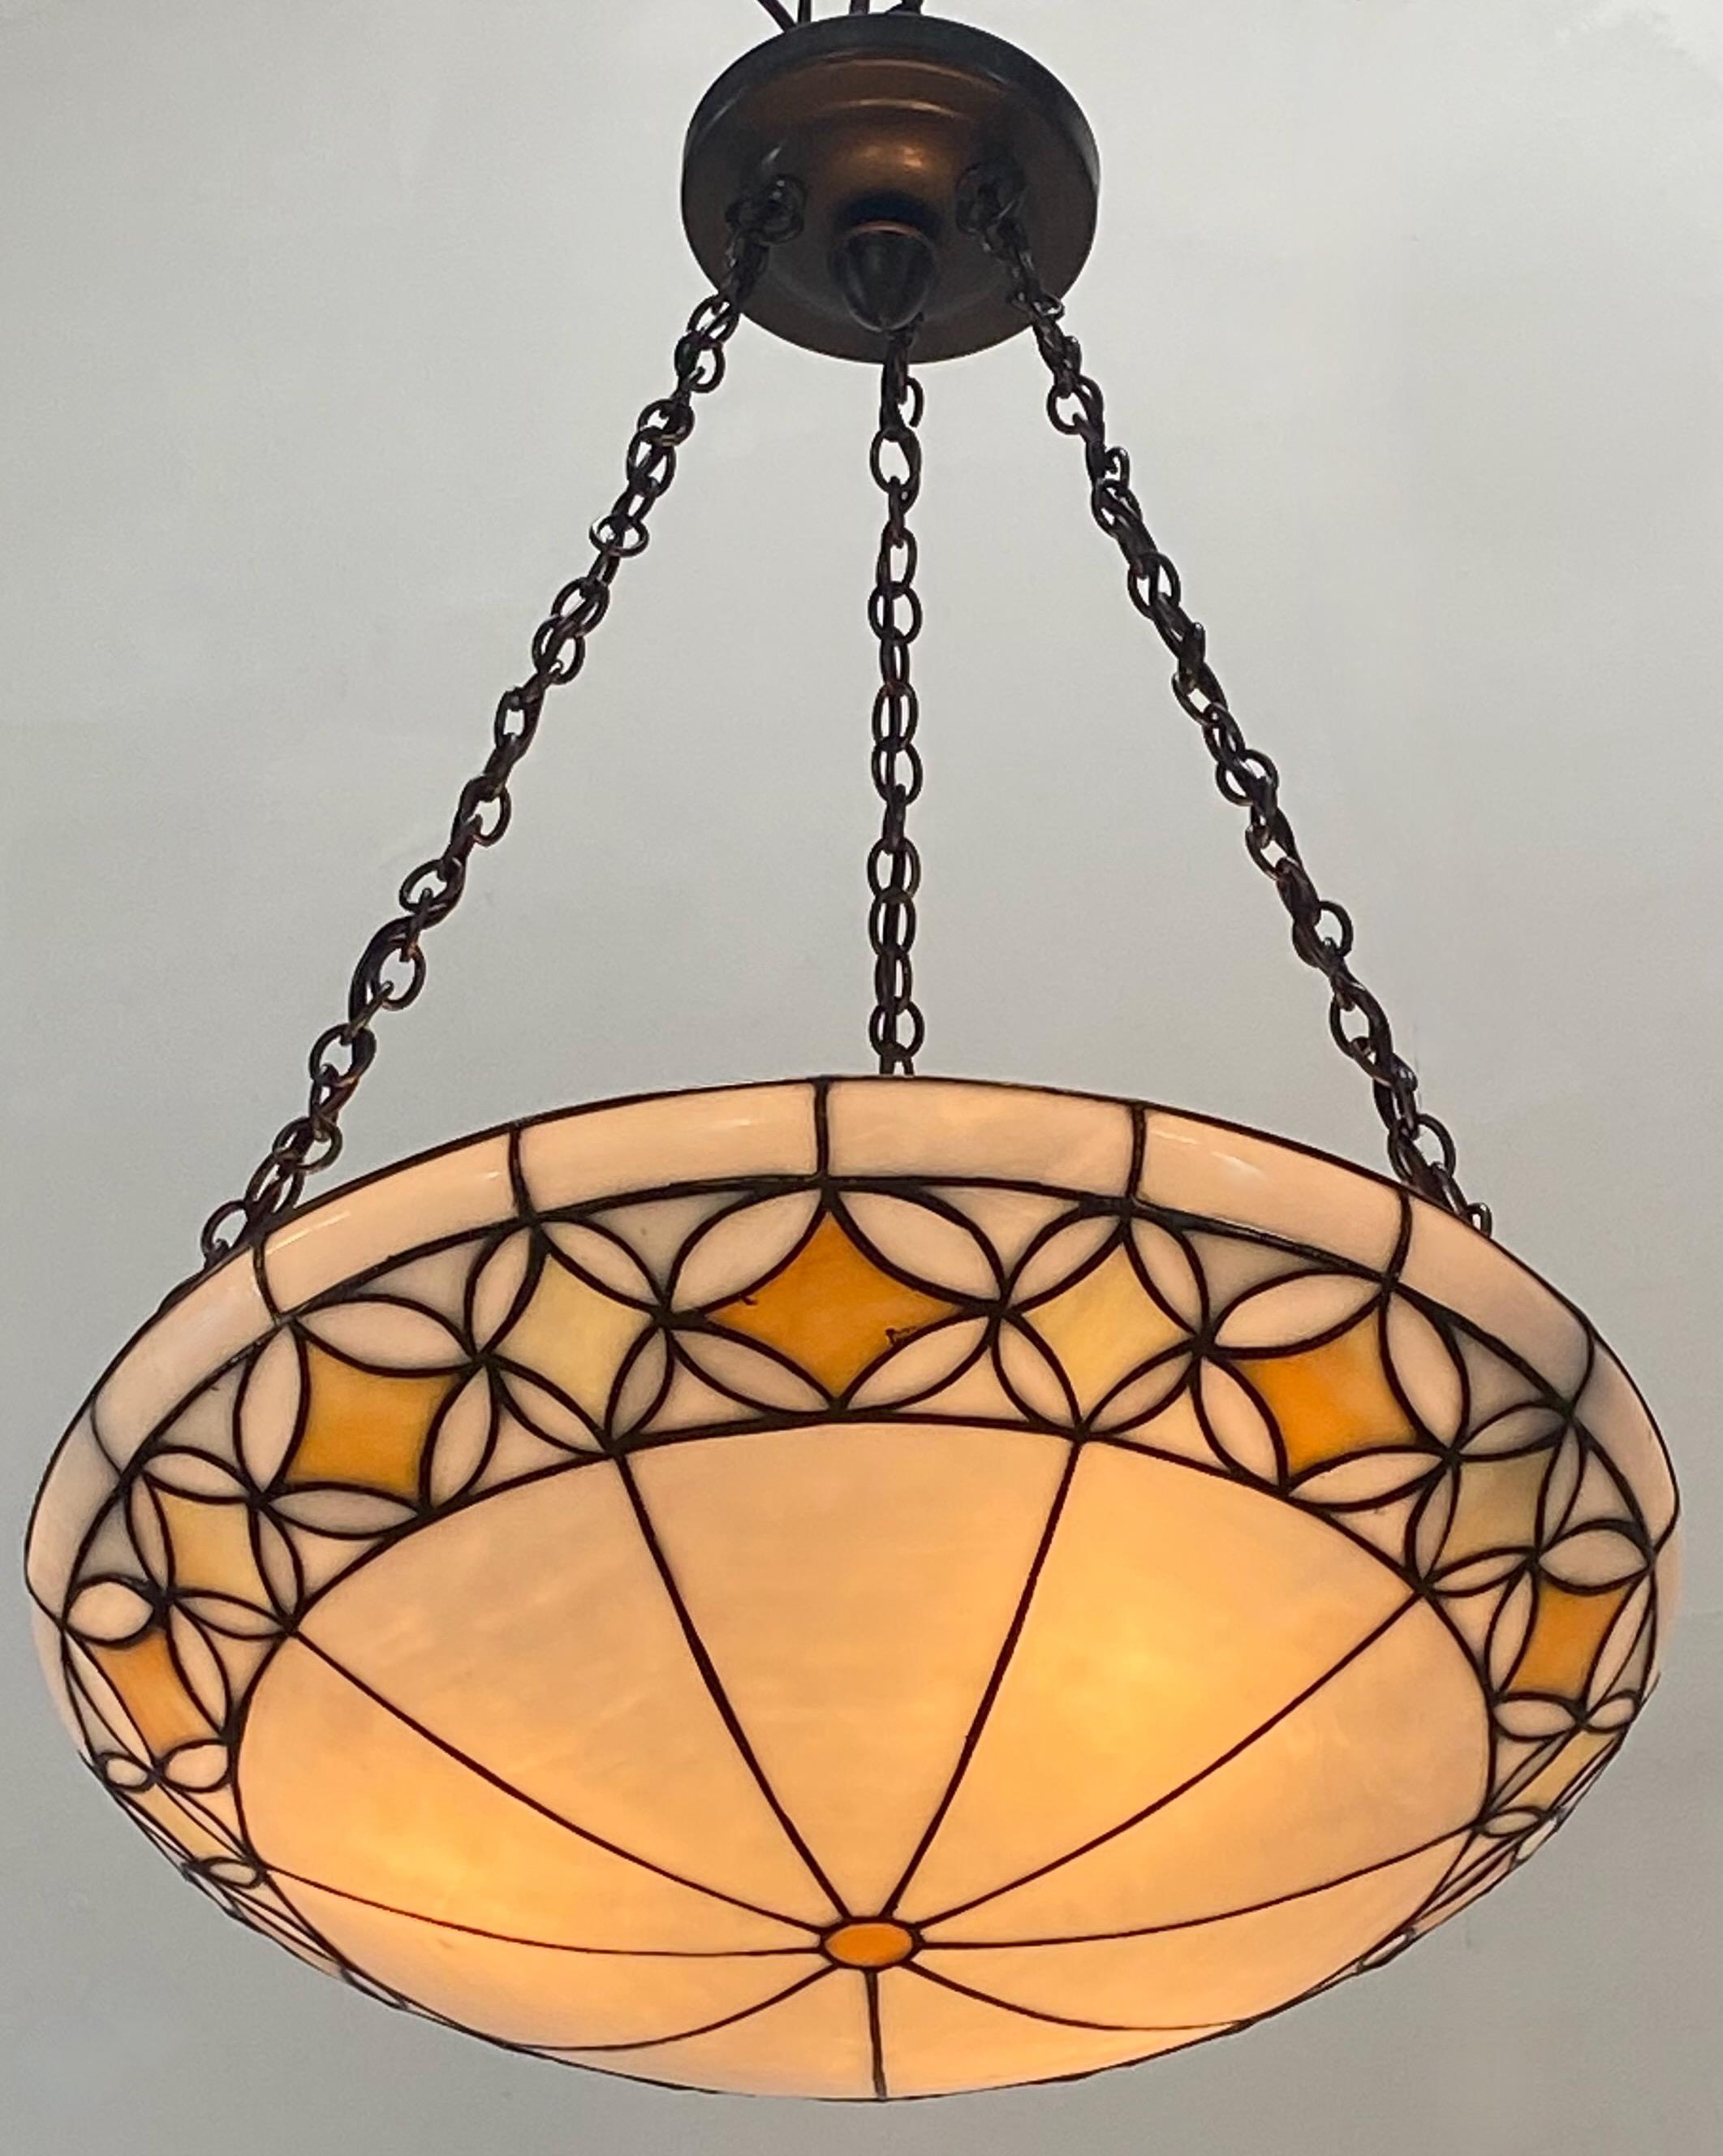 Arts and Crafts Antique Leaded Glass Pendant Light Fixture, American Early 20th Century